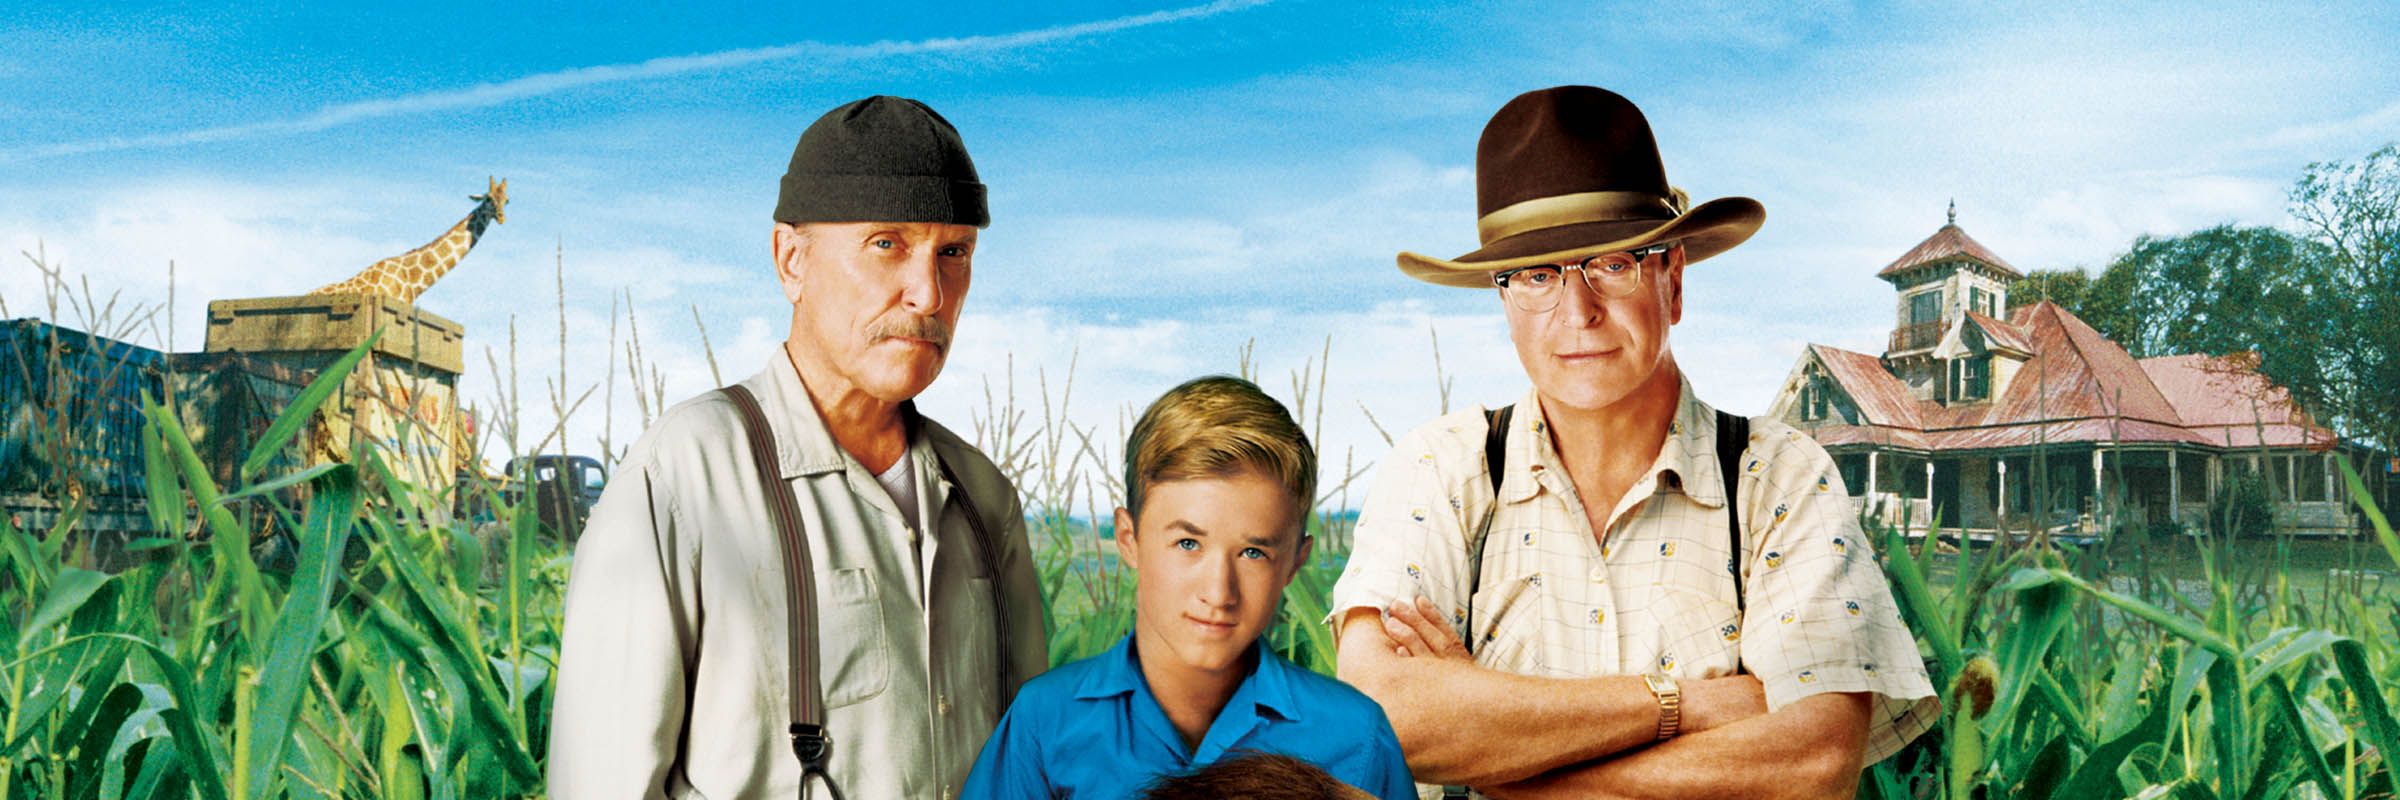 Secondhand Lions | Full Movie | Movies Anywhere